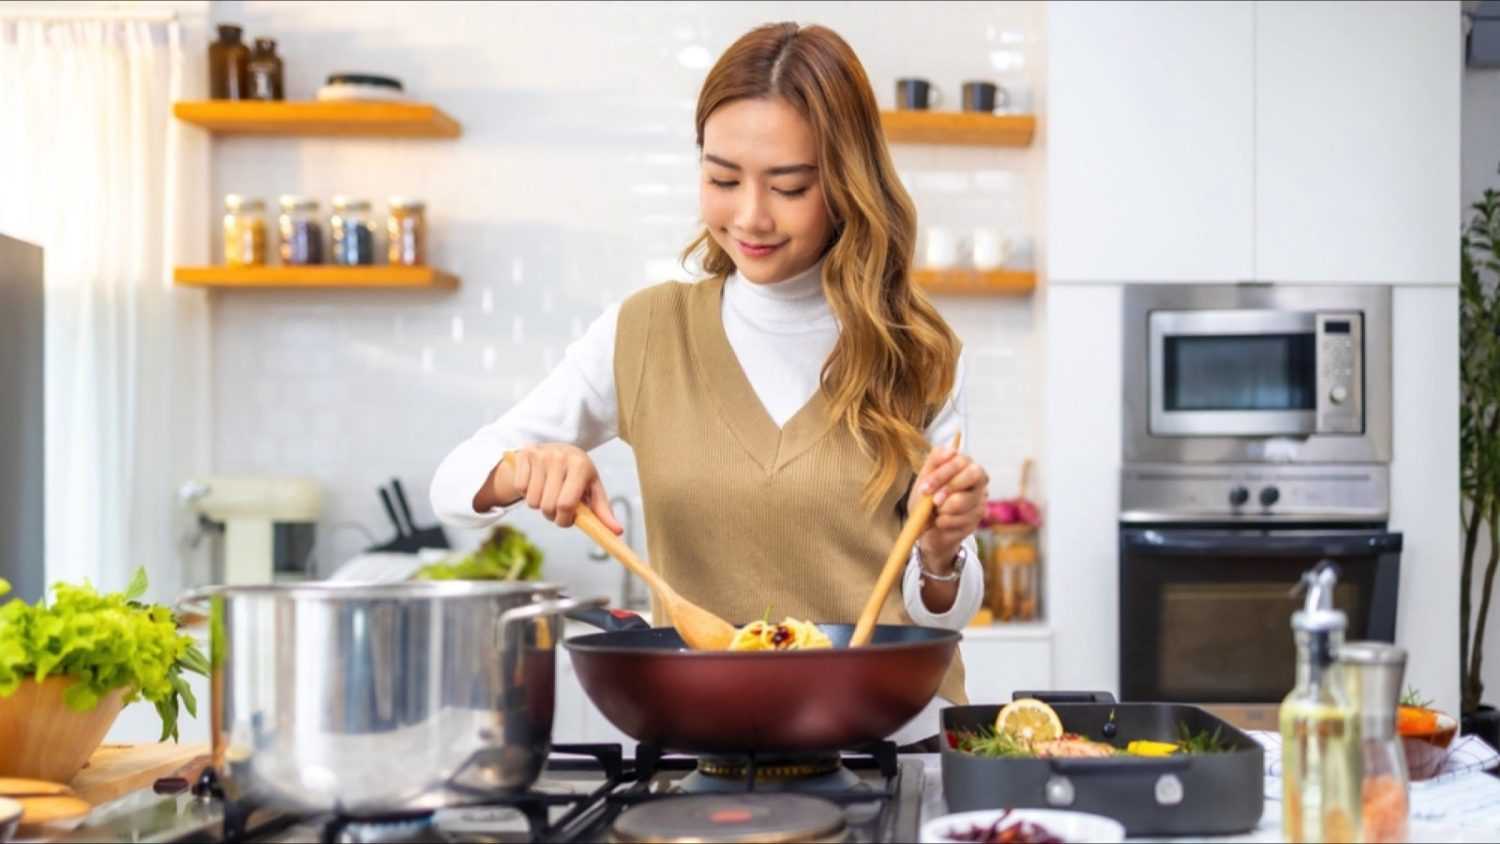 Asian woman cooking happily